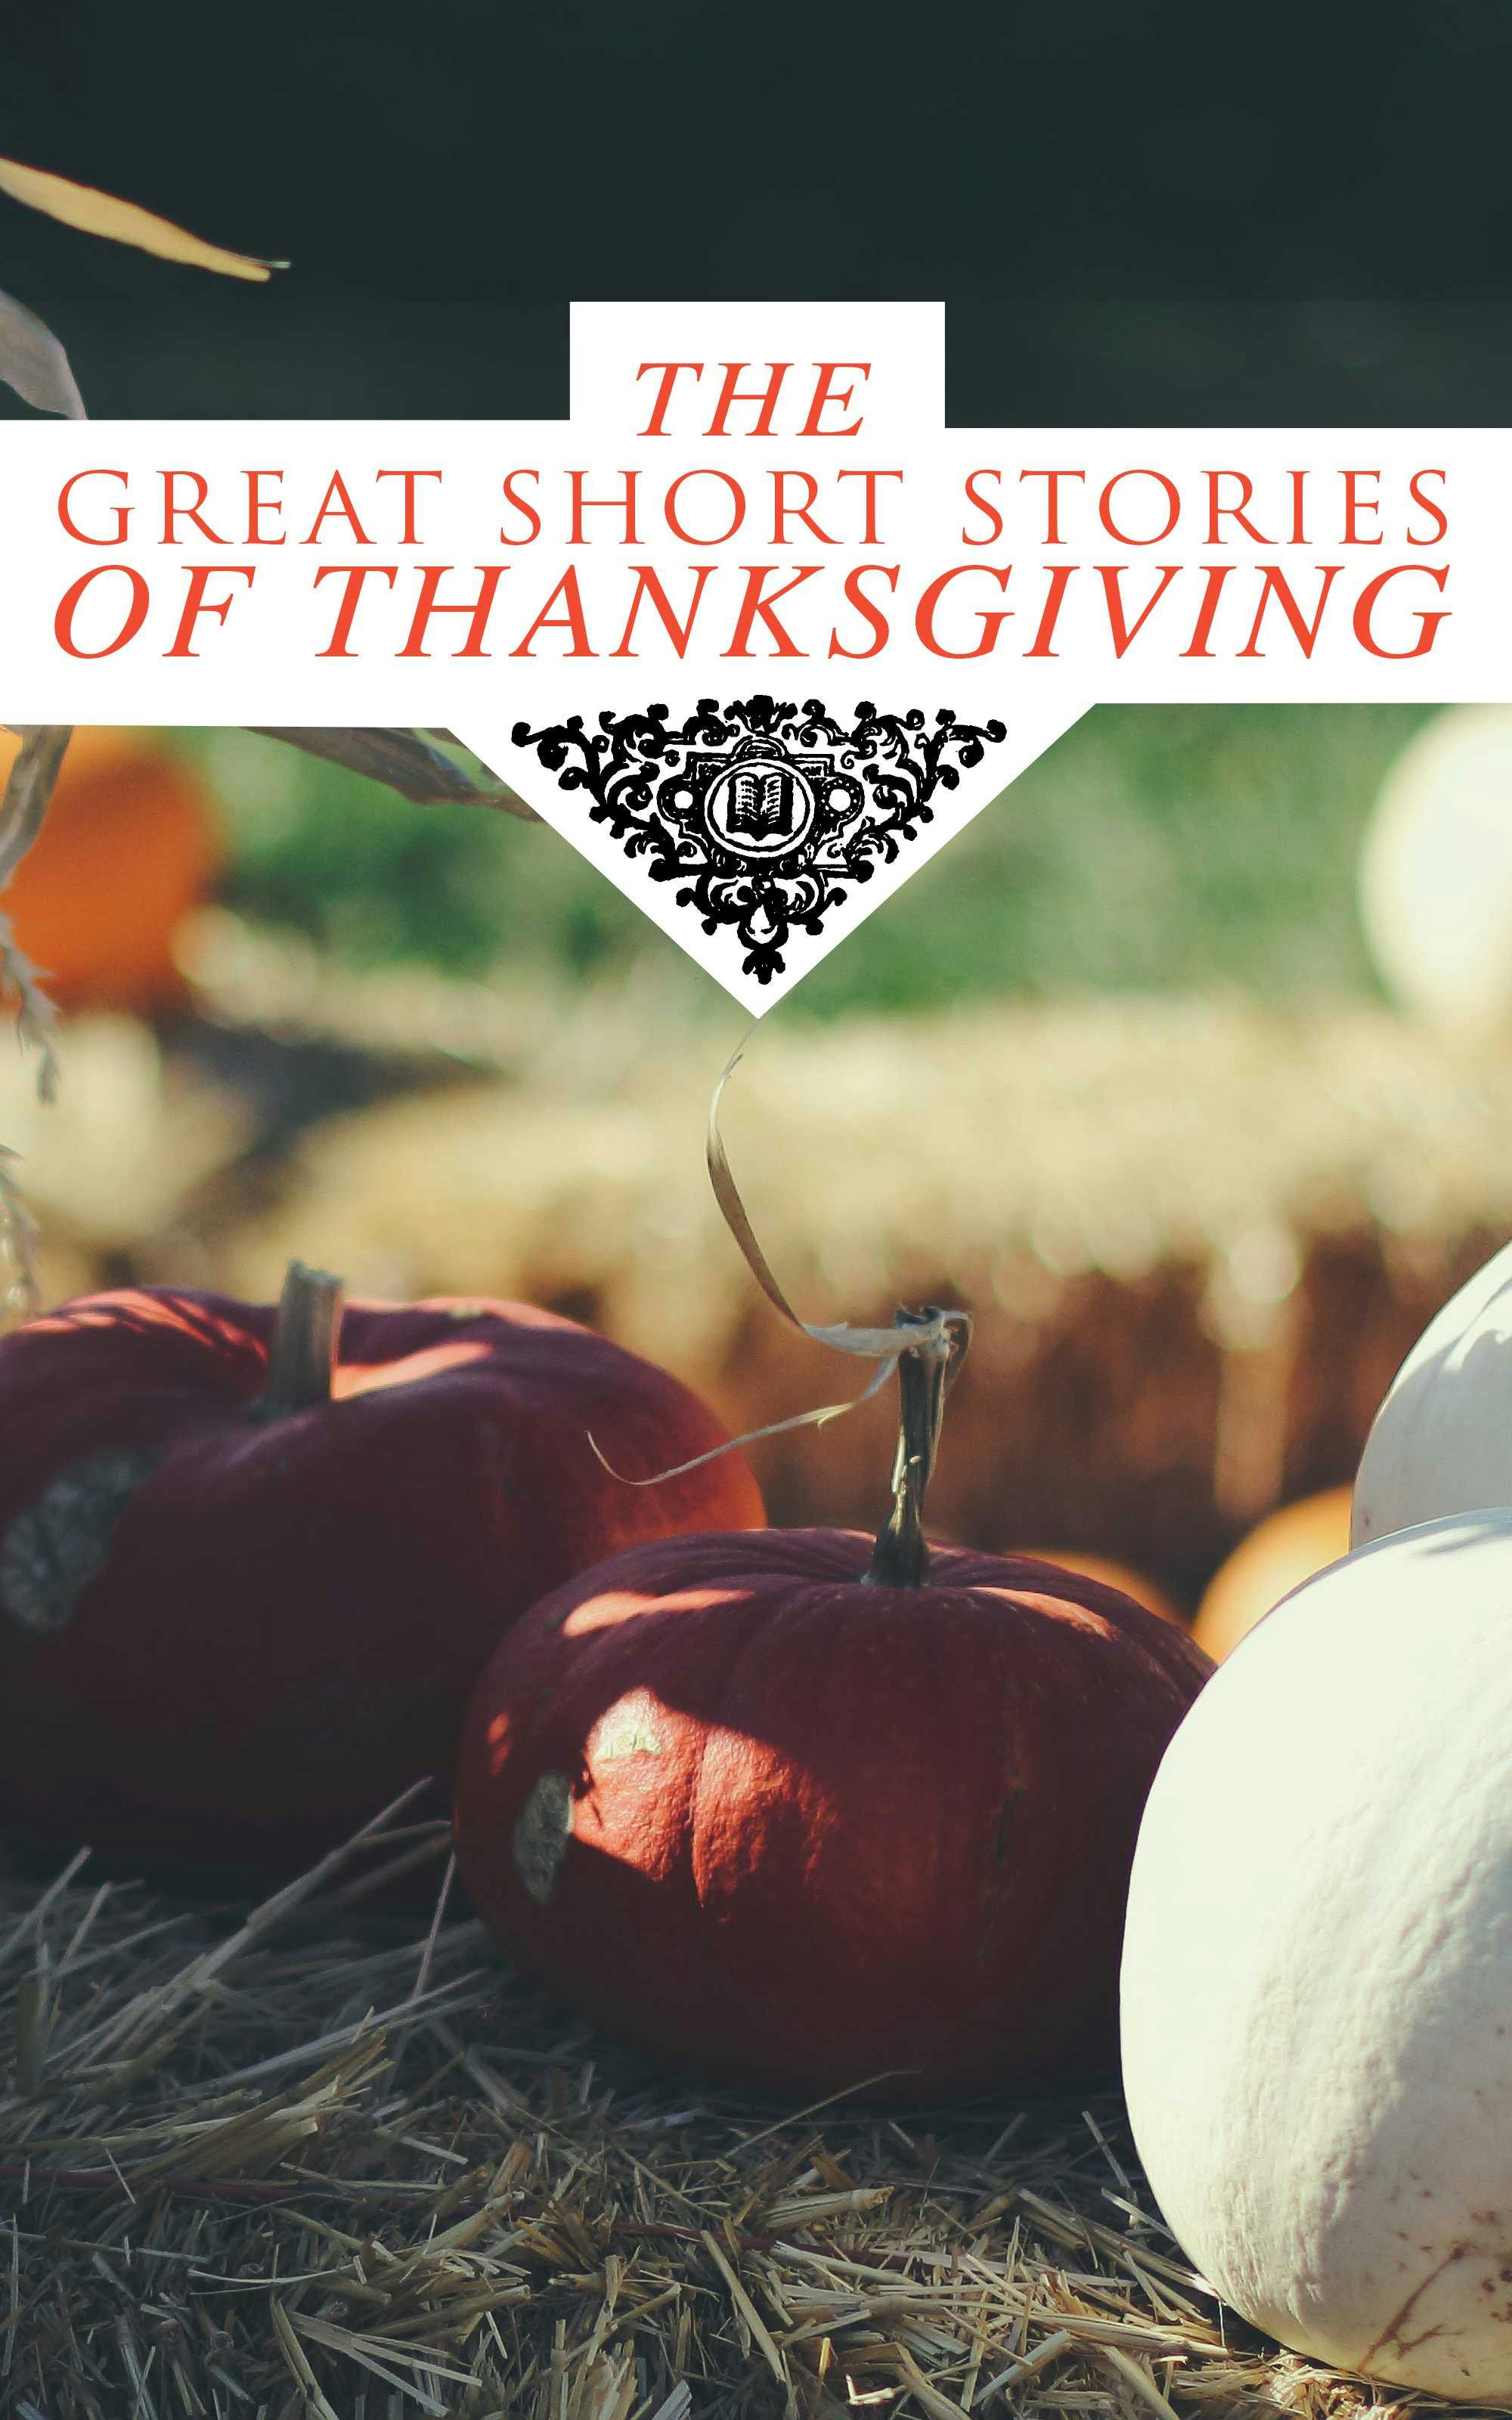 The Great Short Stories of Thanksgiving: Two Thanksgiving Day Gentlemen, How We Kept Thanksgiving at Oldtown, The Master of the Harvest, Three Thanksgivings, Ezra's Thanksgivin' Out West, A Wolfville Thanksgiving... - Ida Hamilton Munsell, Lucy Maud Montgomery, Alfred Henry Lewis, Nathaniel Hawthorne, Mary Jane Holmes, O. Henry, Edward Everett Hale, Eleanor H. Porter, Eugene Field, Susan Coolidge, Andrew Lang, Charlotte Perkins Gilman, Nora Perry, Harriet Beecher Stowe, Louisa May Alcott, Sarah Orne Jewett, George Eliot, Alfred Gatty